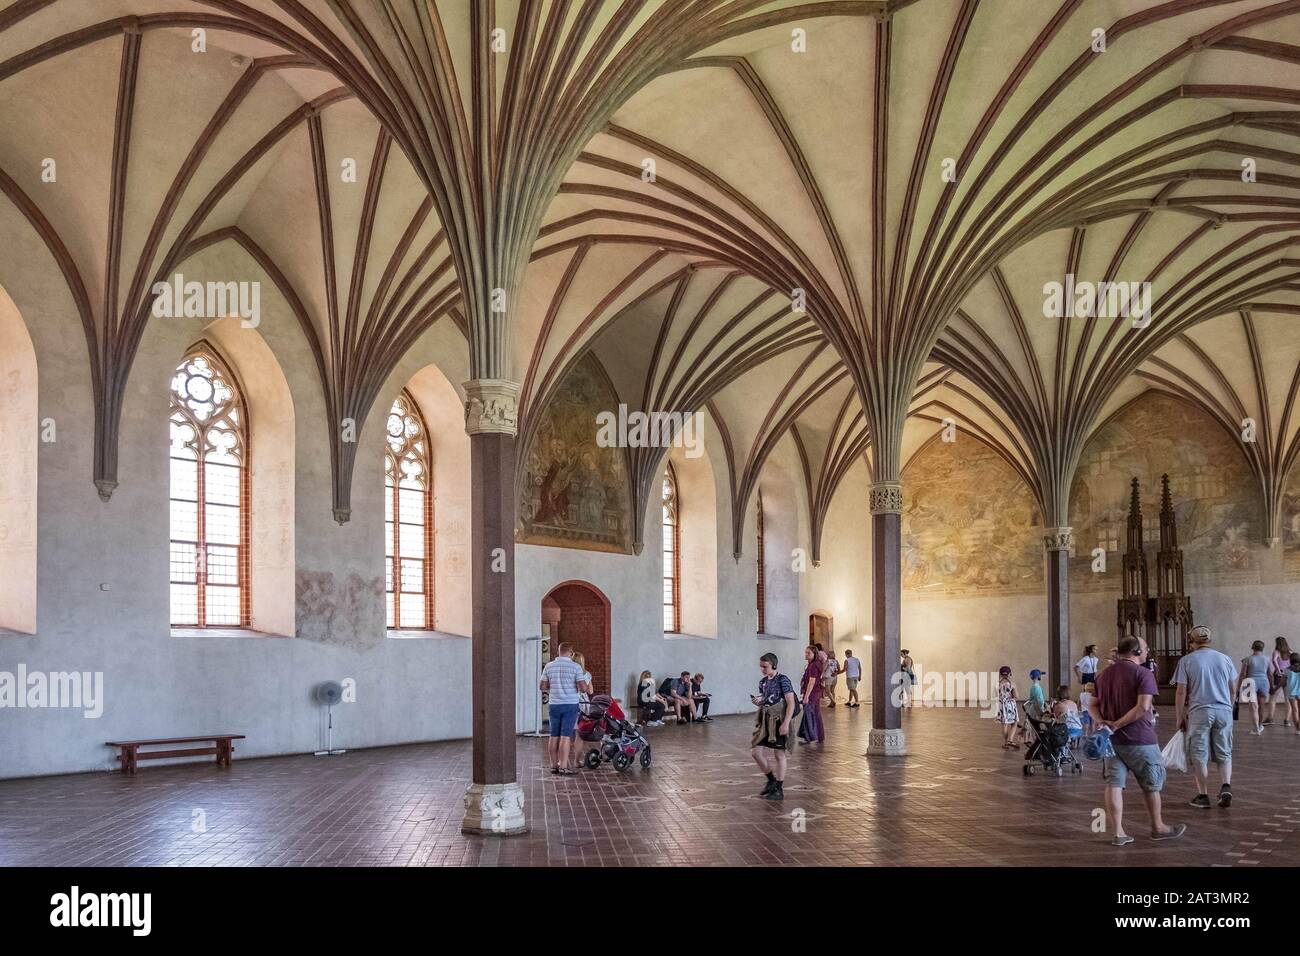 Malbork, Pomerania / Poland - 2019/08/24: Interior of the Grand Dining Chamber in the Middle Castle part of the Medieval Teutonic Order castle and monastery in Malbork, Poland Stock Photo